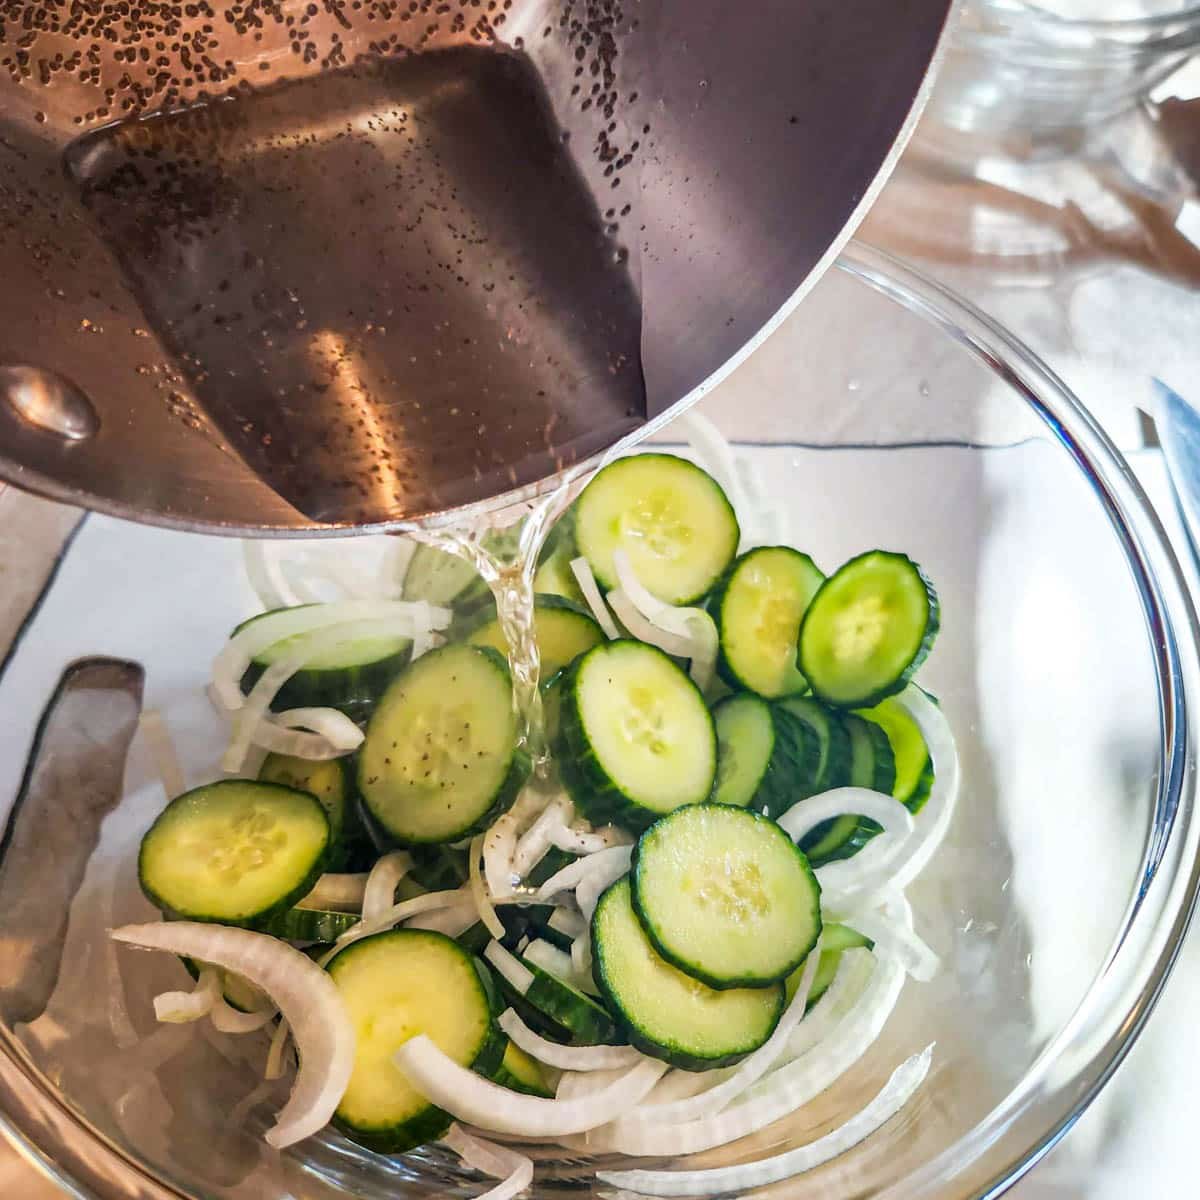 pouring vinegar mixture over cucumbers and onion